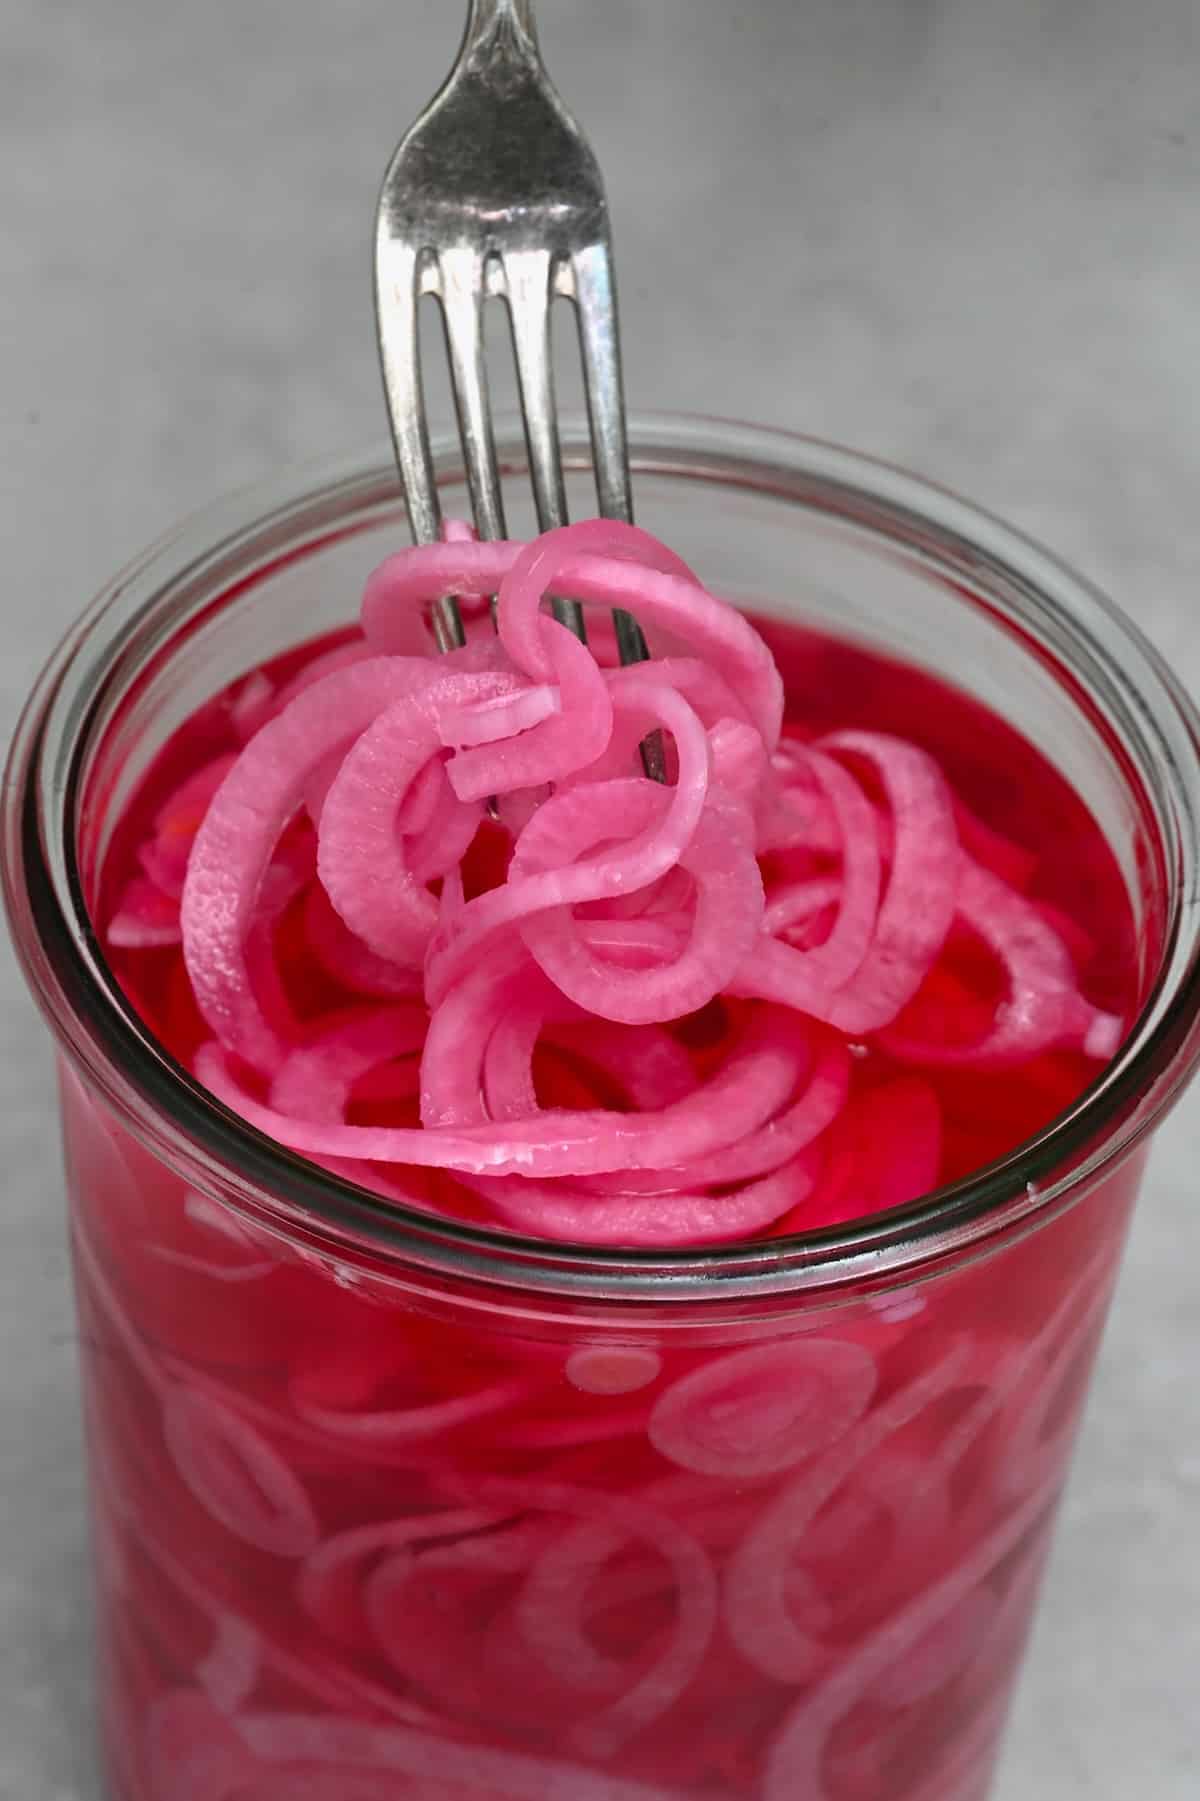 A forkful of pickled red onions